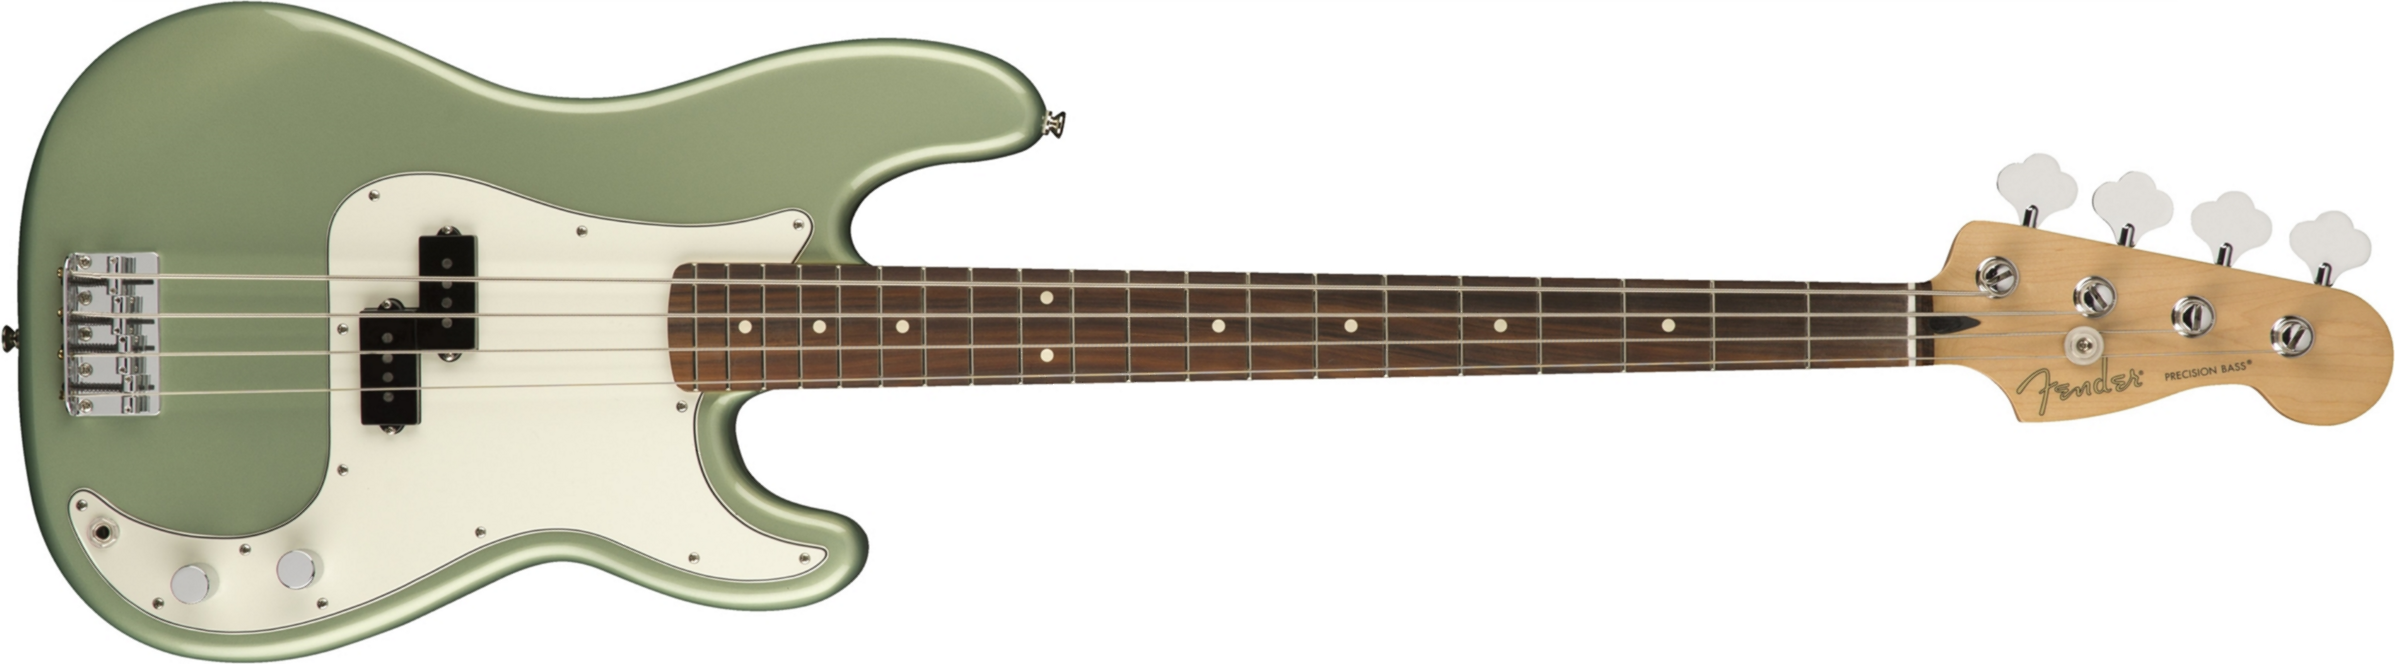 Fender Precision Bass Player Mex Pf - Sage Green Metallic - Solid body electric bass - Main picture